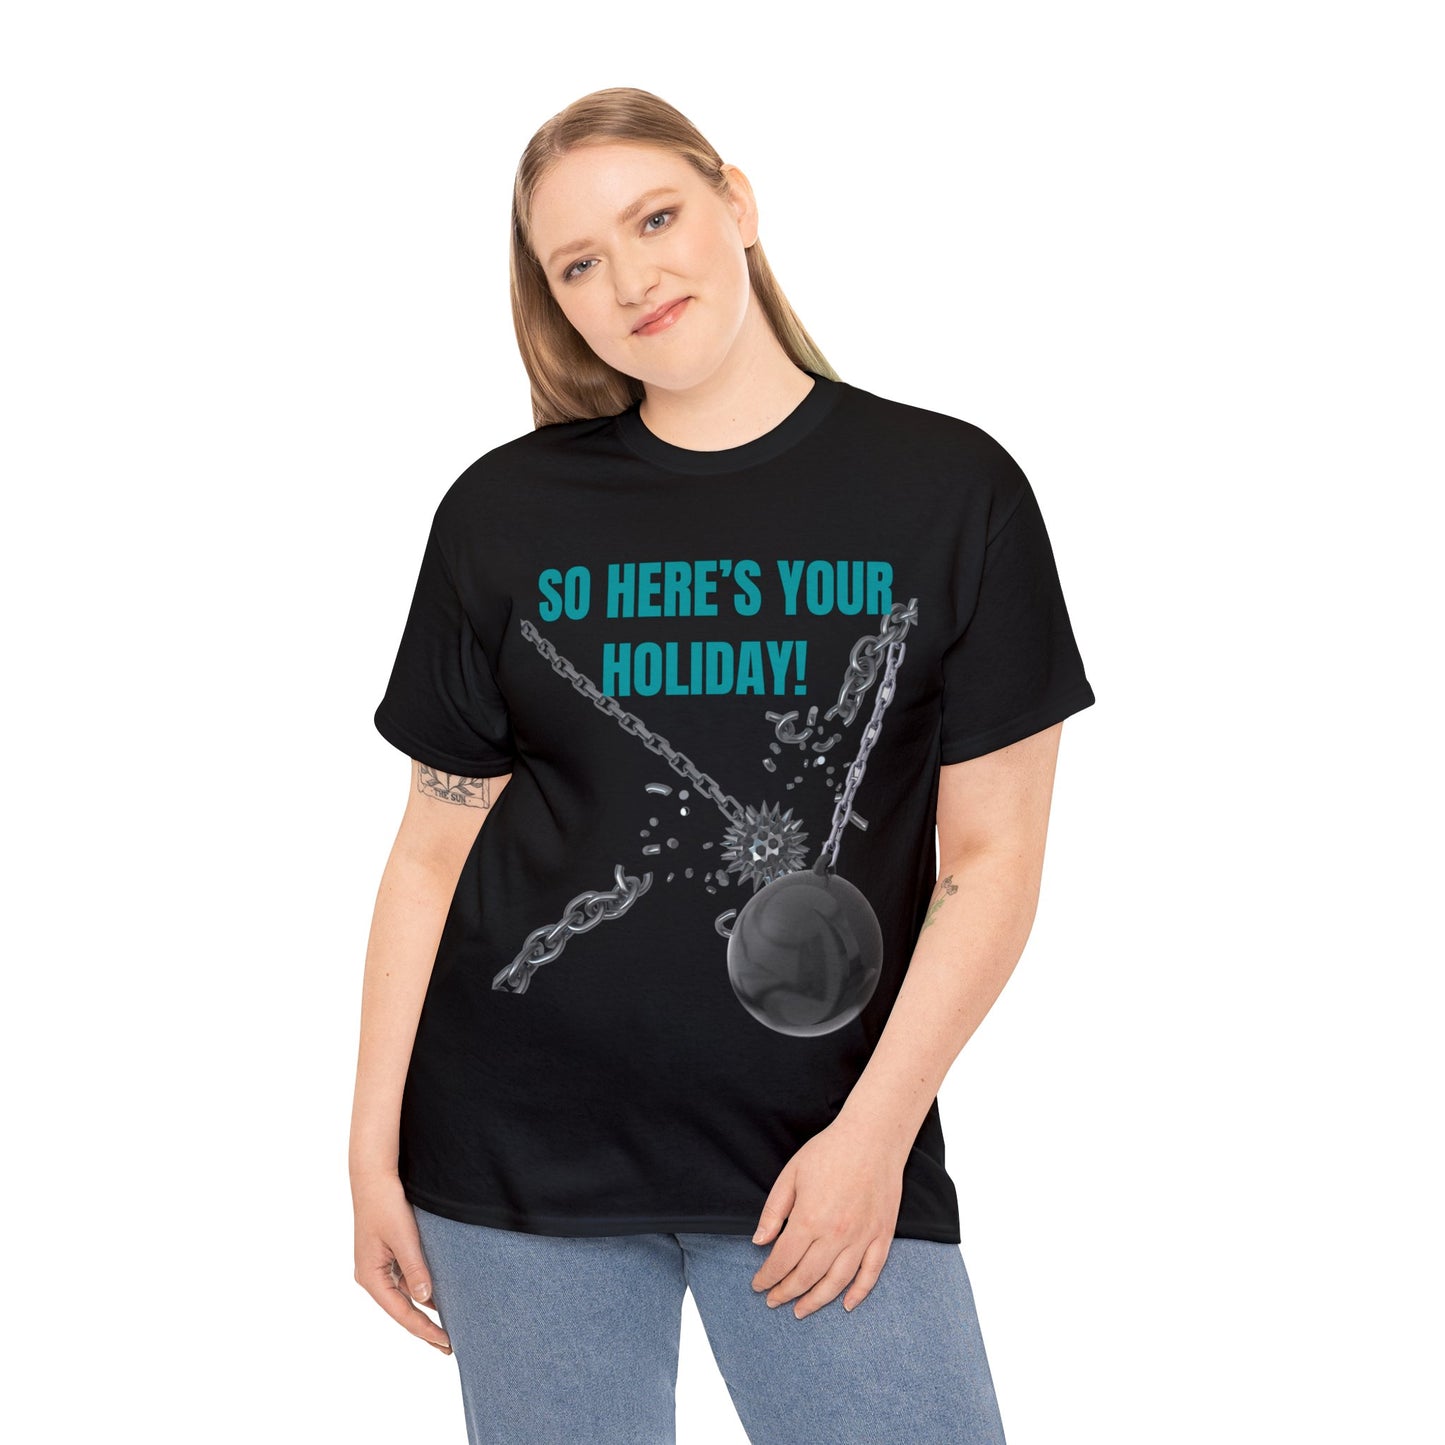 Blink 182 T-Shirt So Here’s Your Holiday T-Shirt, Song Tee